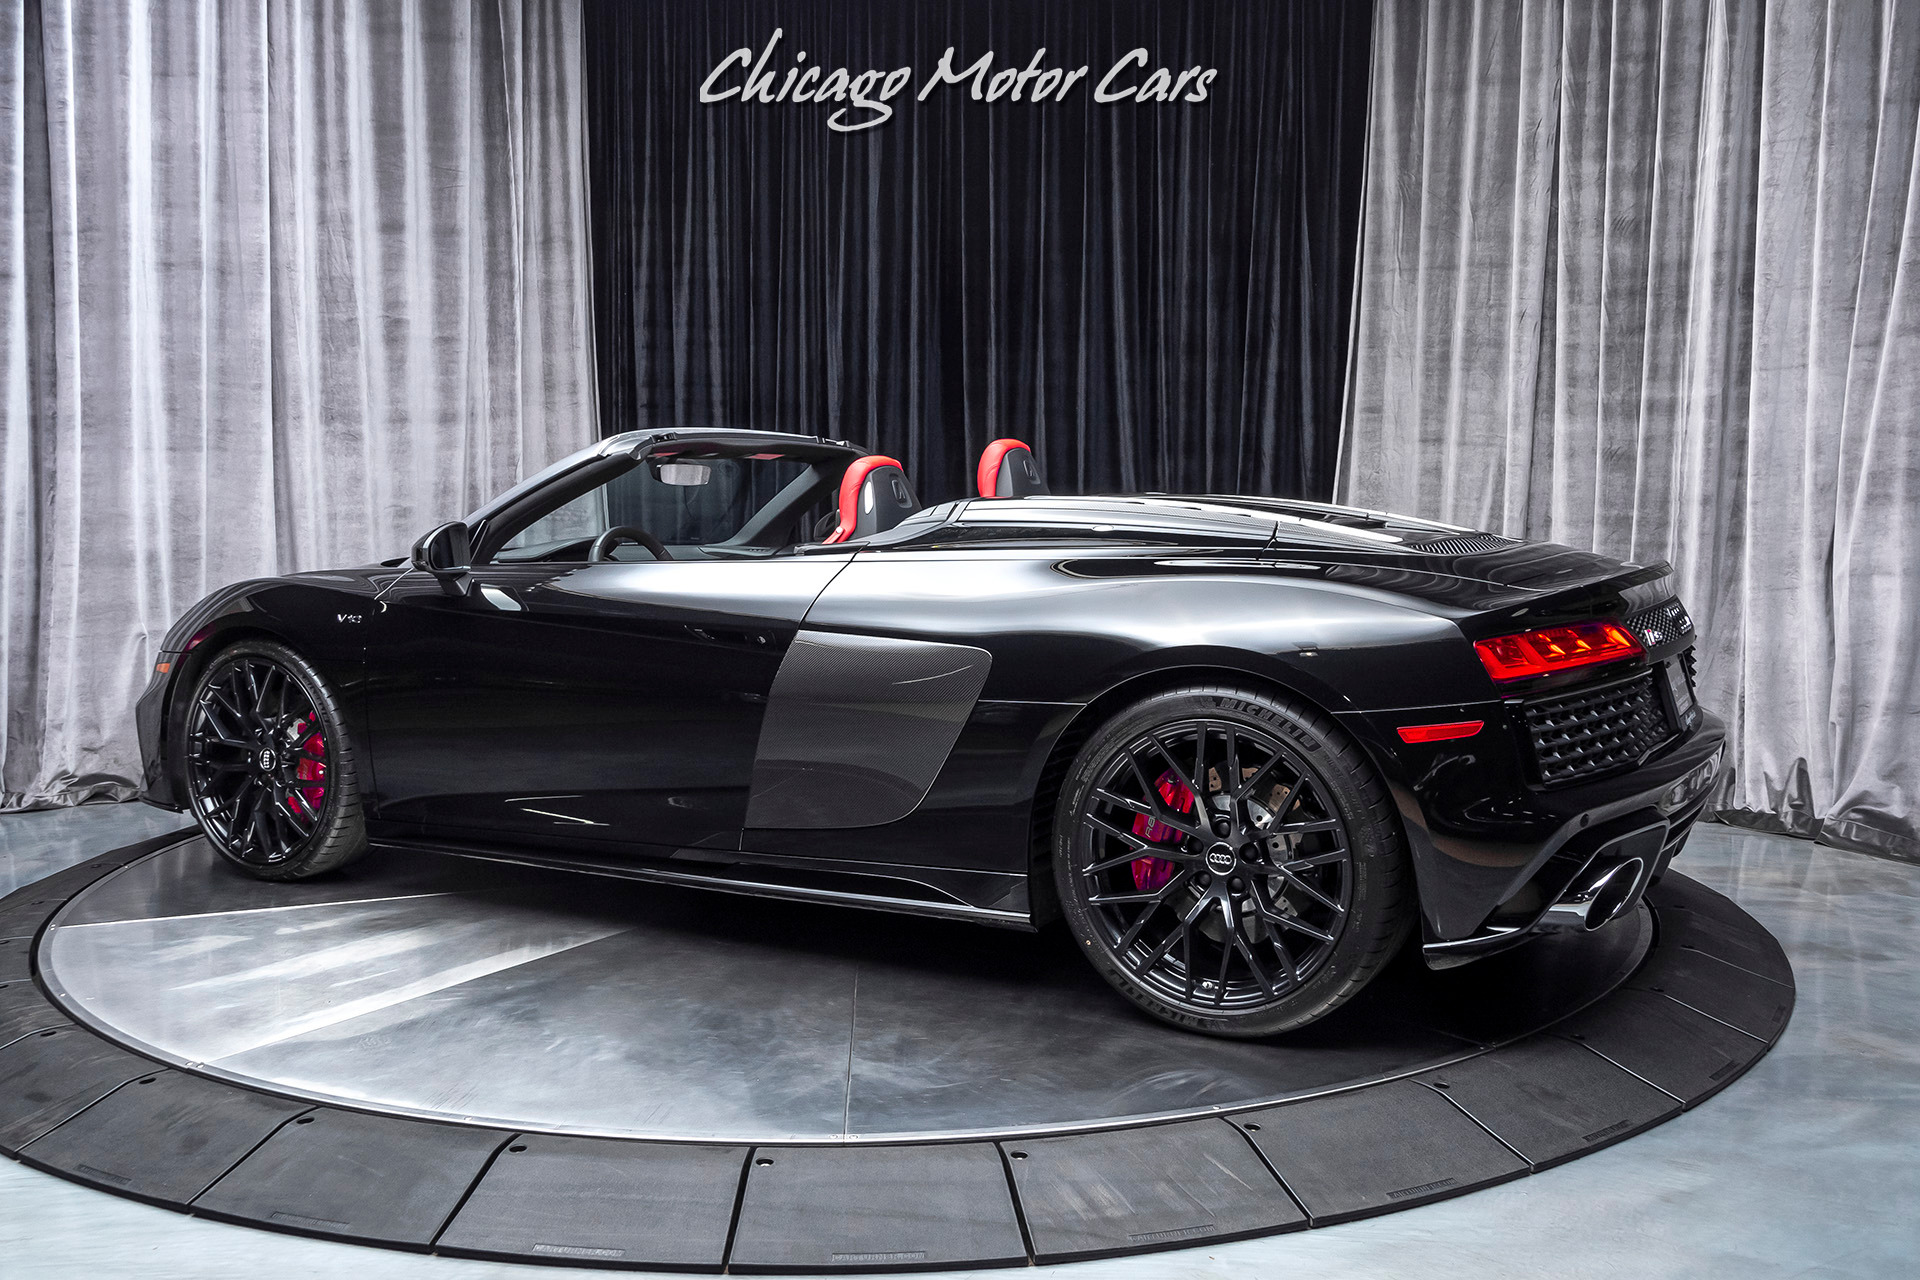 Used 2020 Audi R8 5.2L V10 Quattro Spyder Convertible MSRP $203k+ ONLY  2,700 MILES! For Sale (Special Pricing) | Chicago Motor Cars Stock #16974